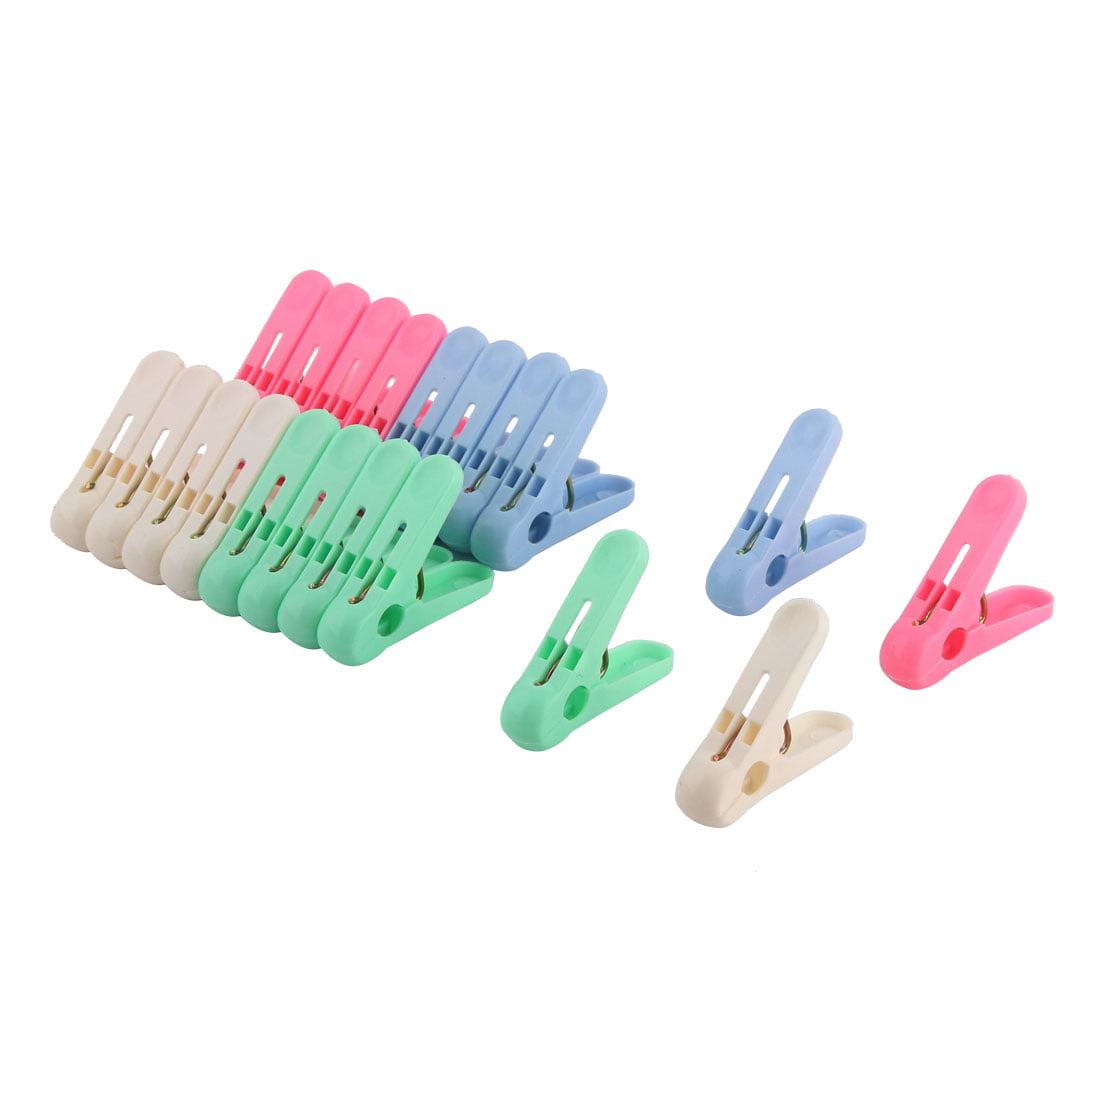 12Pc Utility Towel Socks Laundry Wash Hanging Plastic Clips Pegs Clothes ClampWU 